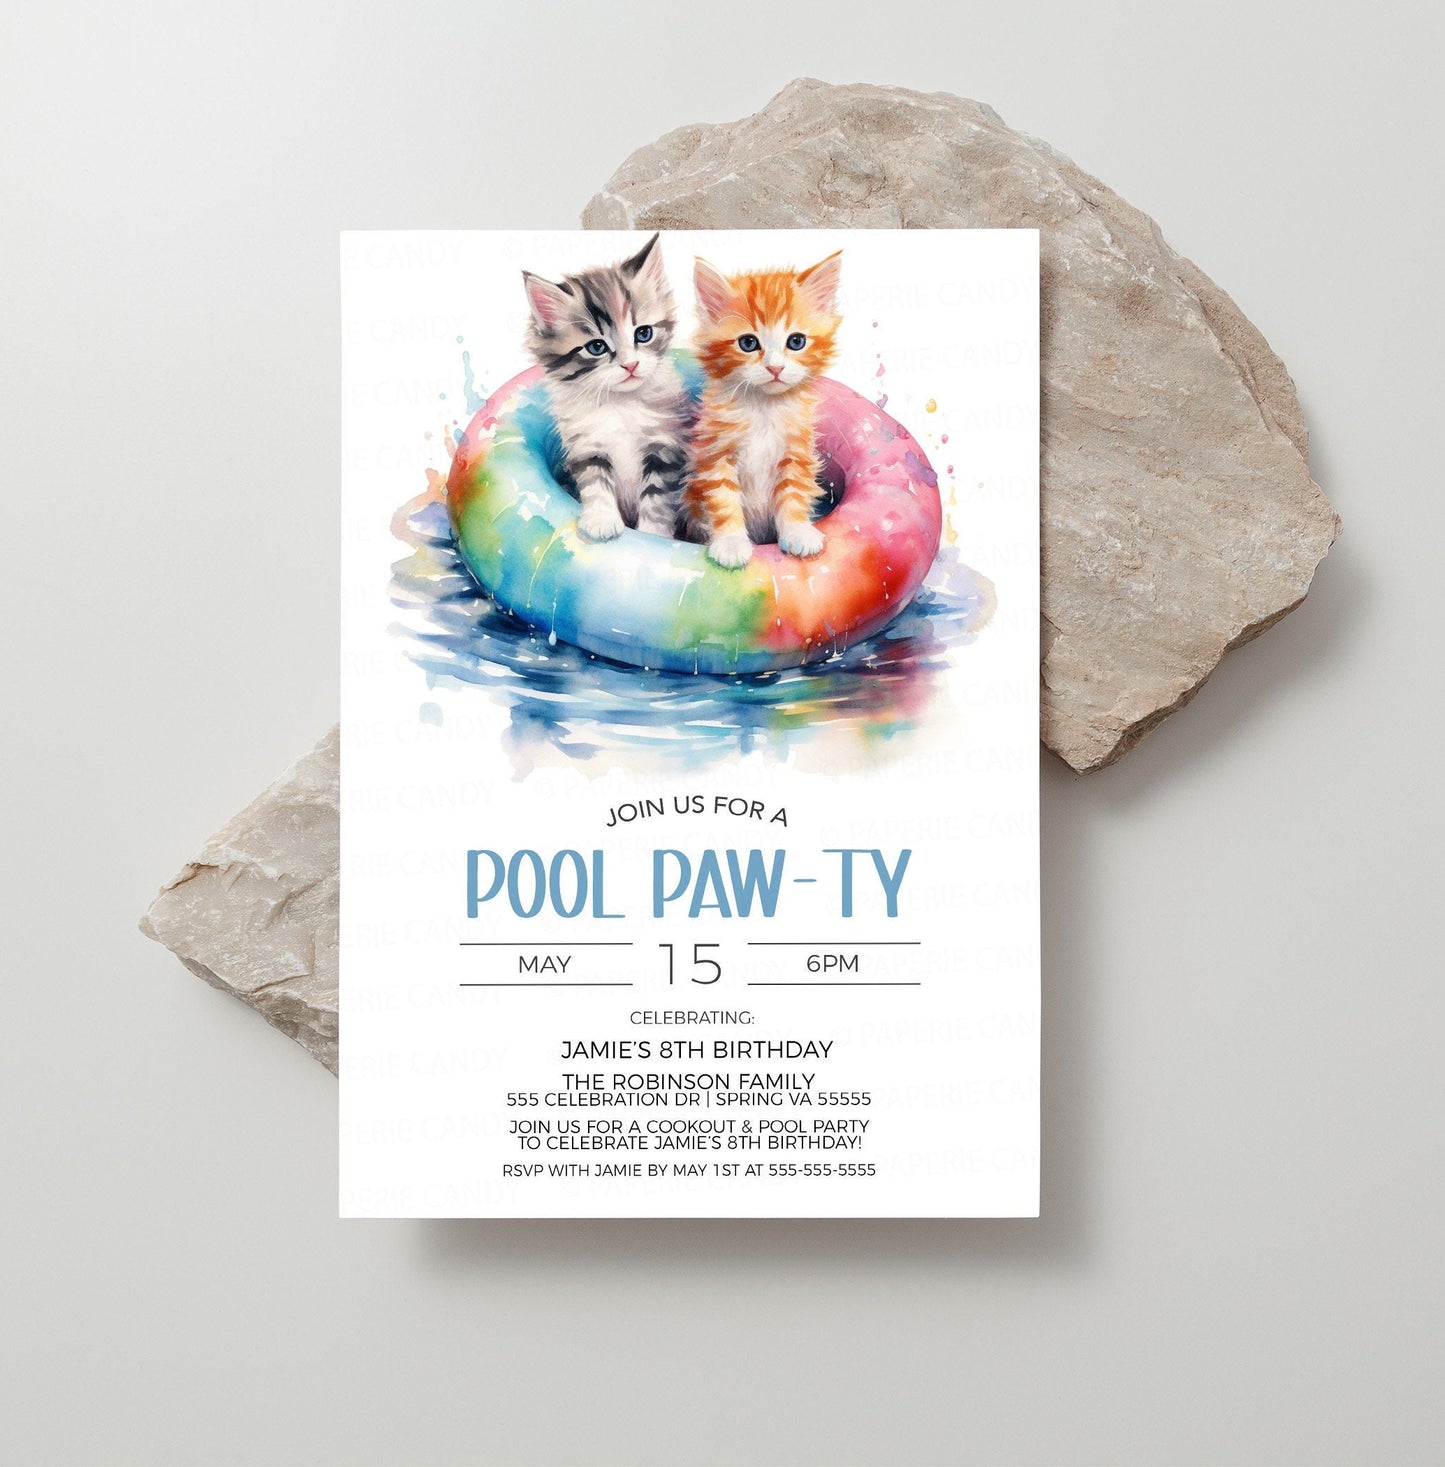 Cat Pool Party Invitation, Kitten Pawty Invite, Kittens Cats Birthday Party, Let's Pawty, Calling All Pawty Animals, Editable Printable